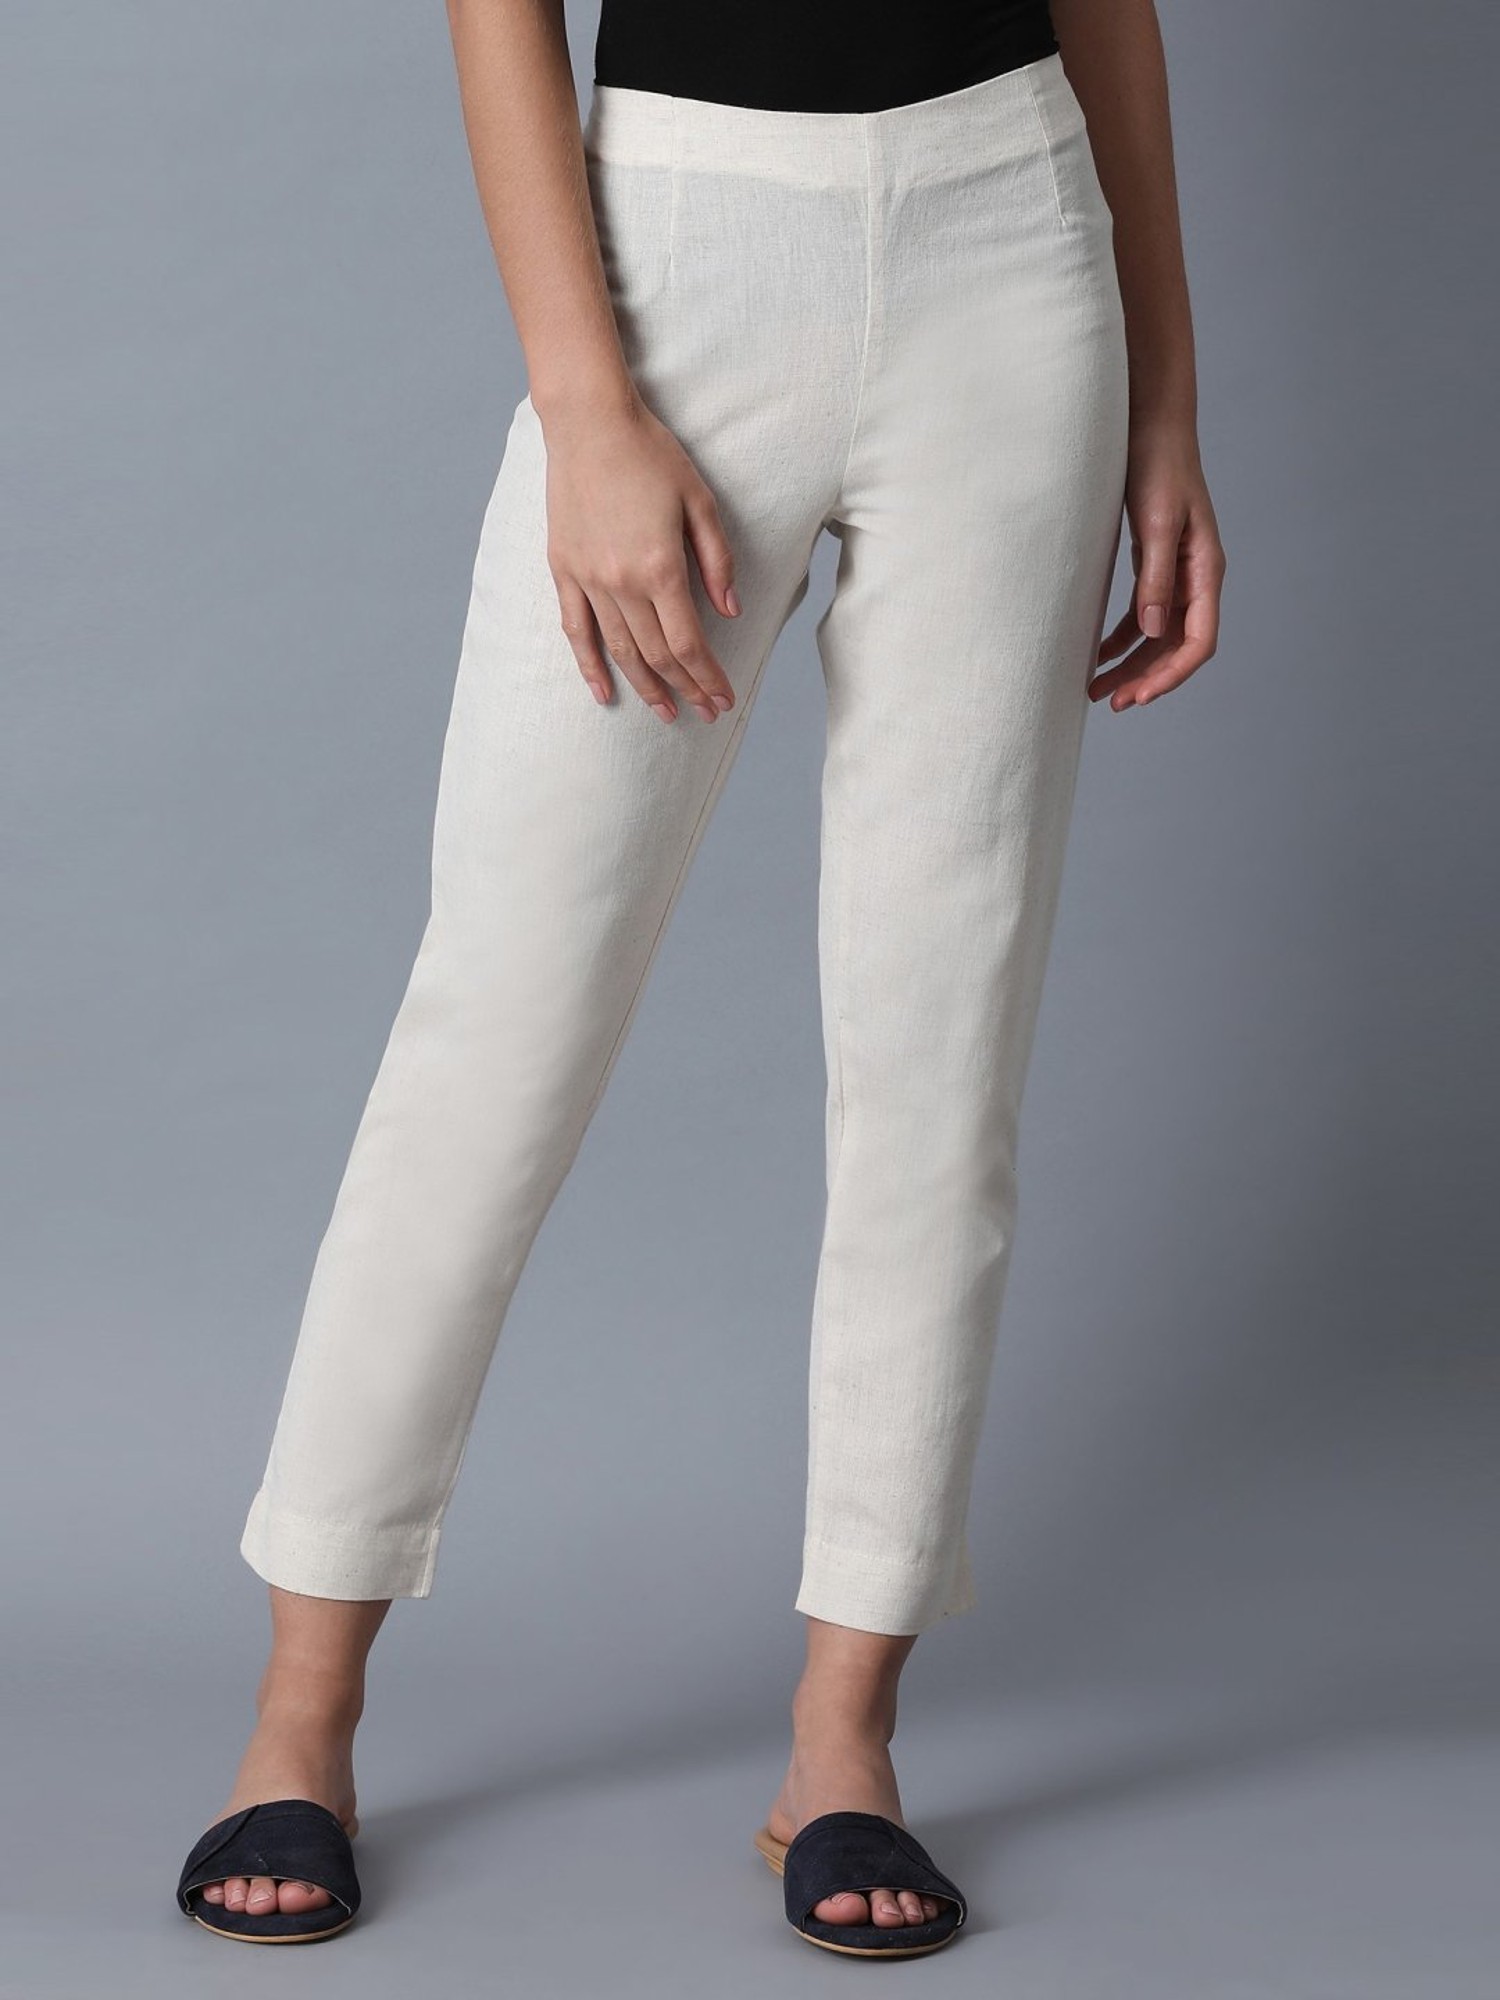 Buy White Trousers  Pants for Women by Marks  Spencer Online  Ajiocom   Pants for women White trouser pants Trouser pants